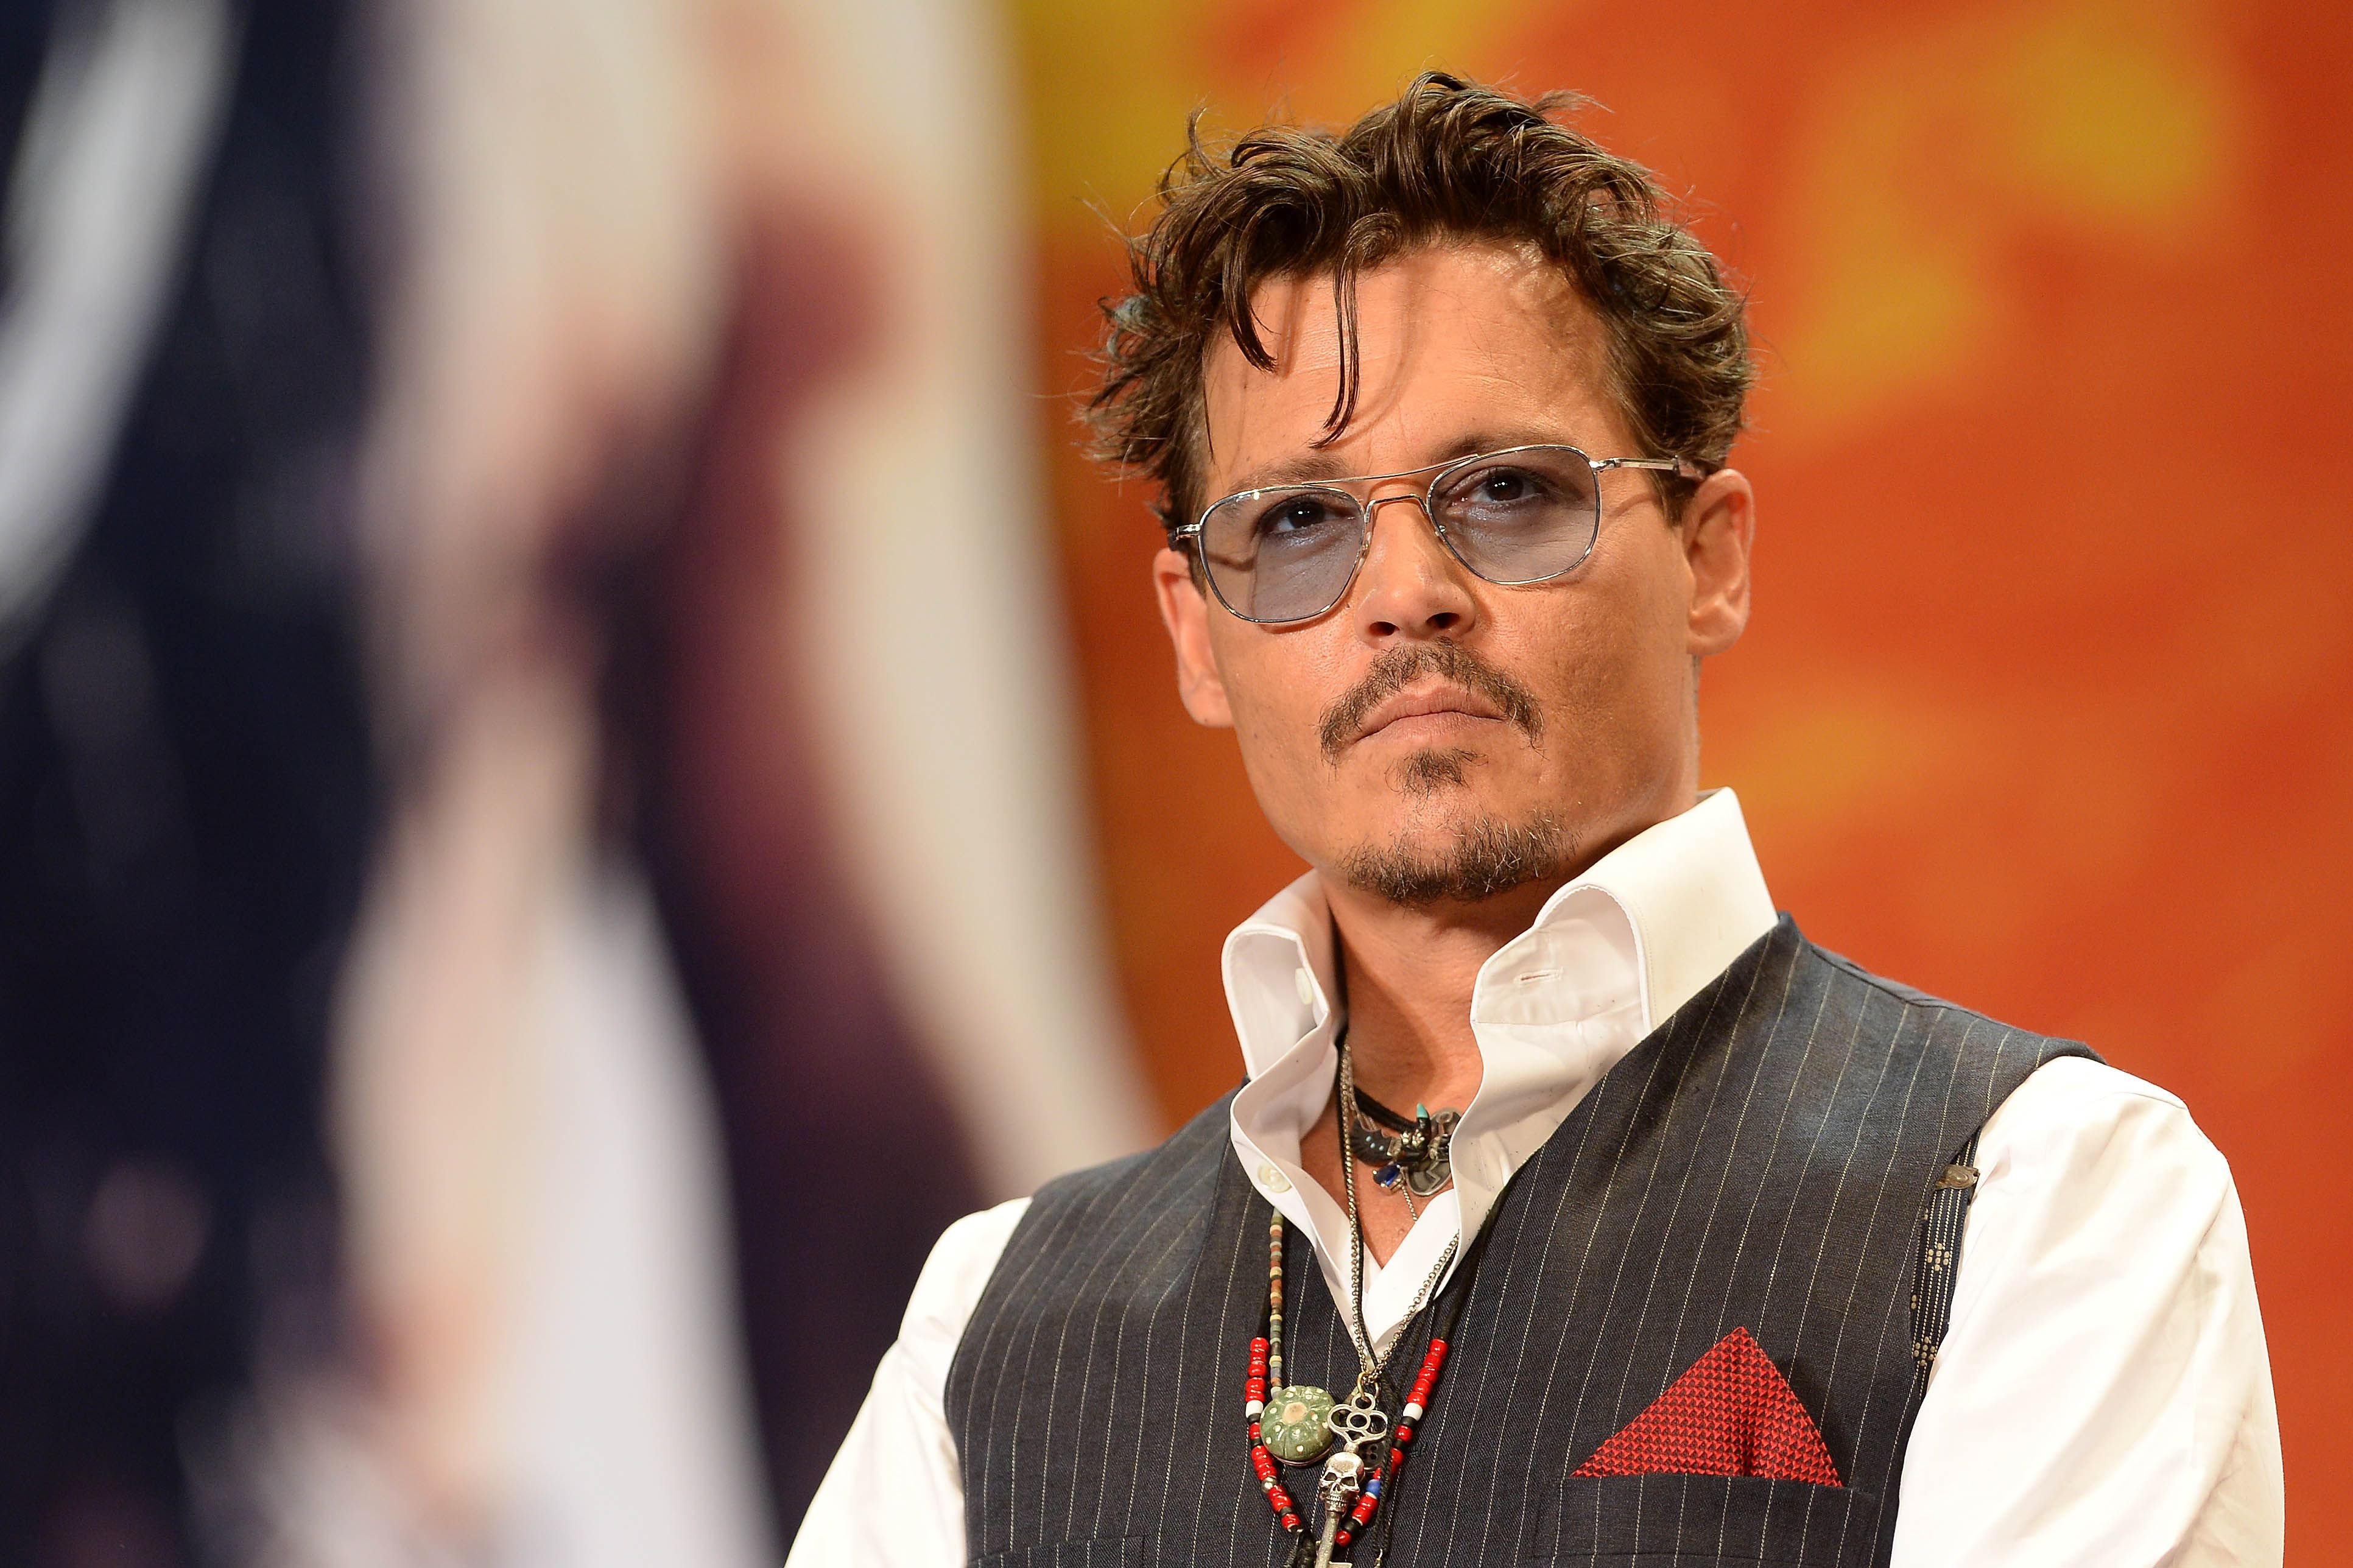 Johnny Depp during the 'Lone Ranger' Japan Premiere at Roppongi Hills on July 17, 2013, in Tokyo, Japan. | Source: Getty Images